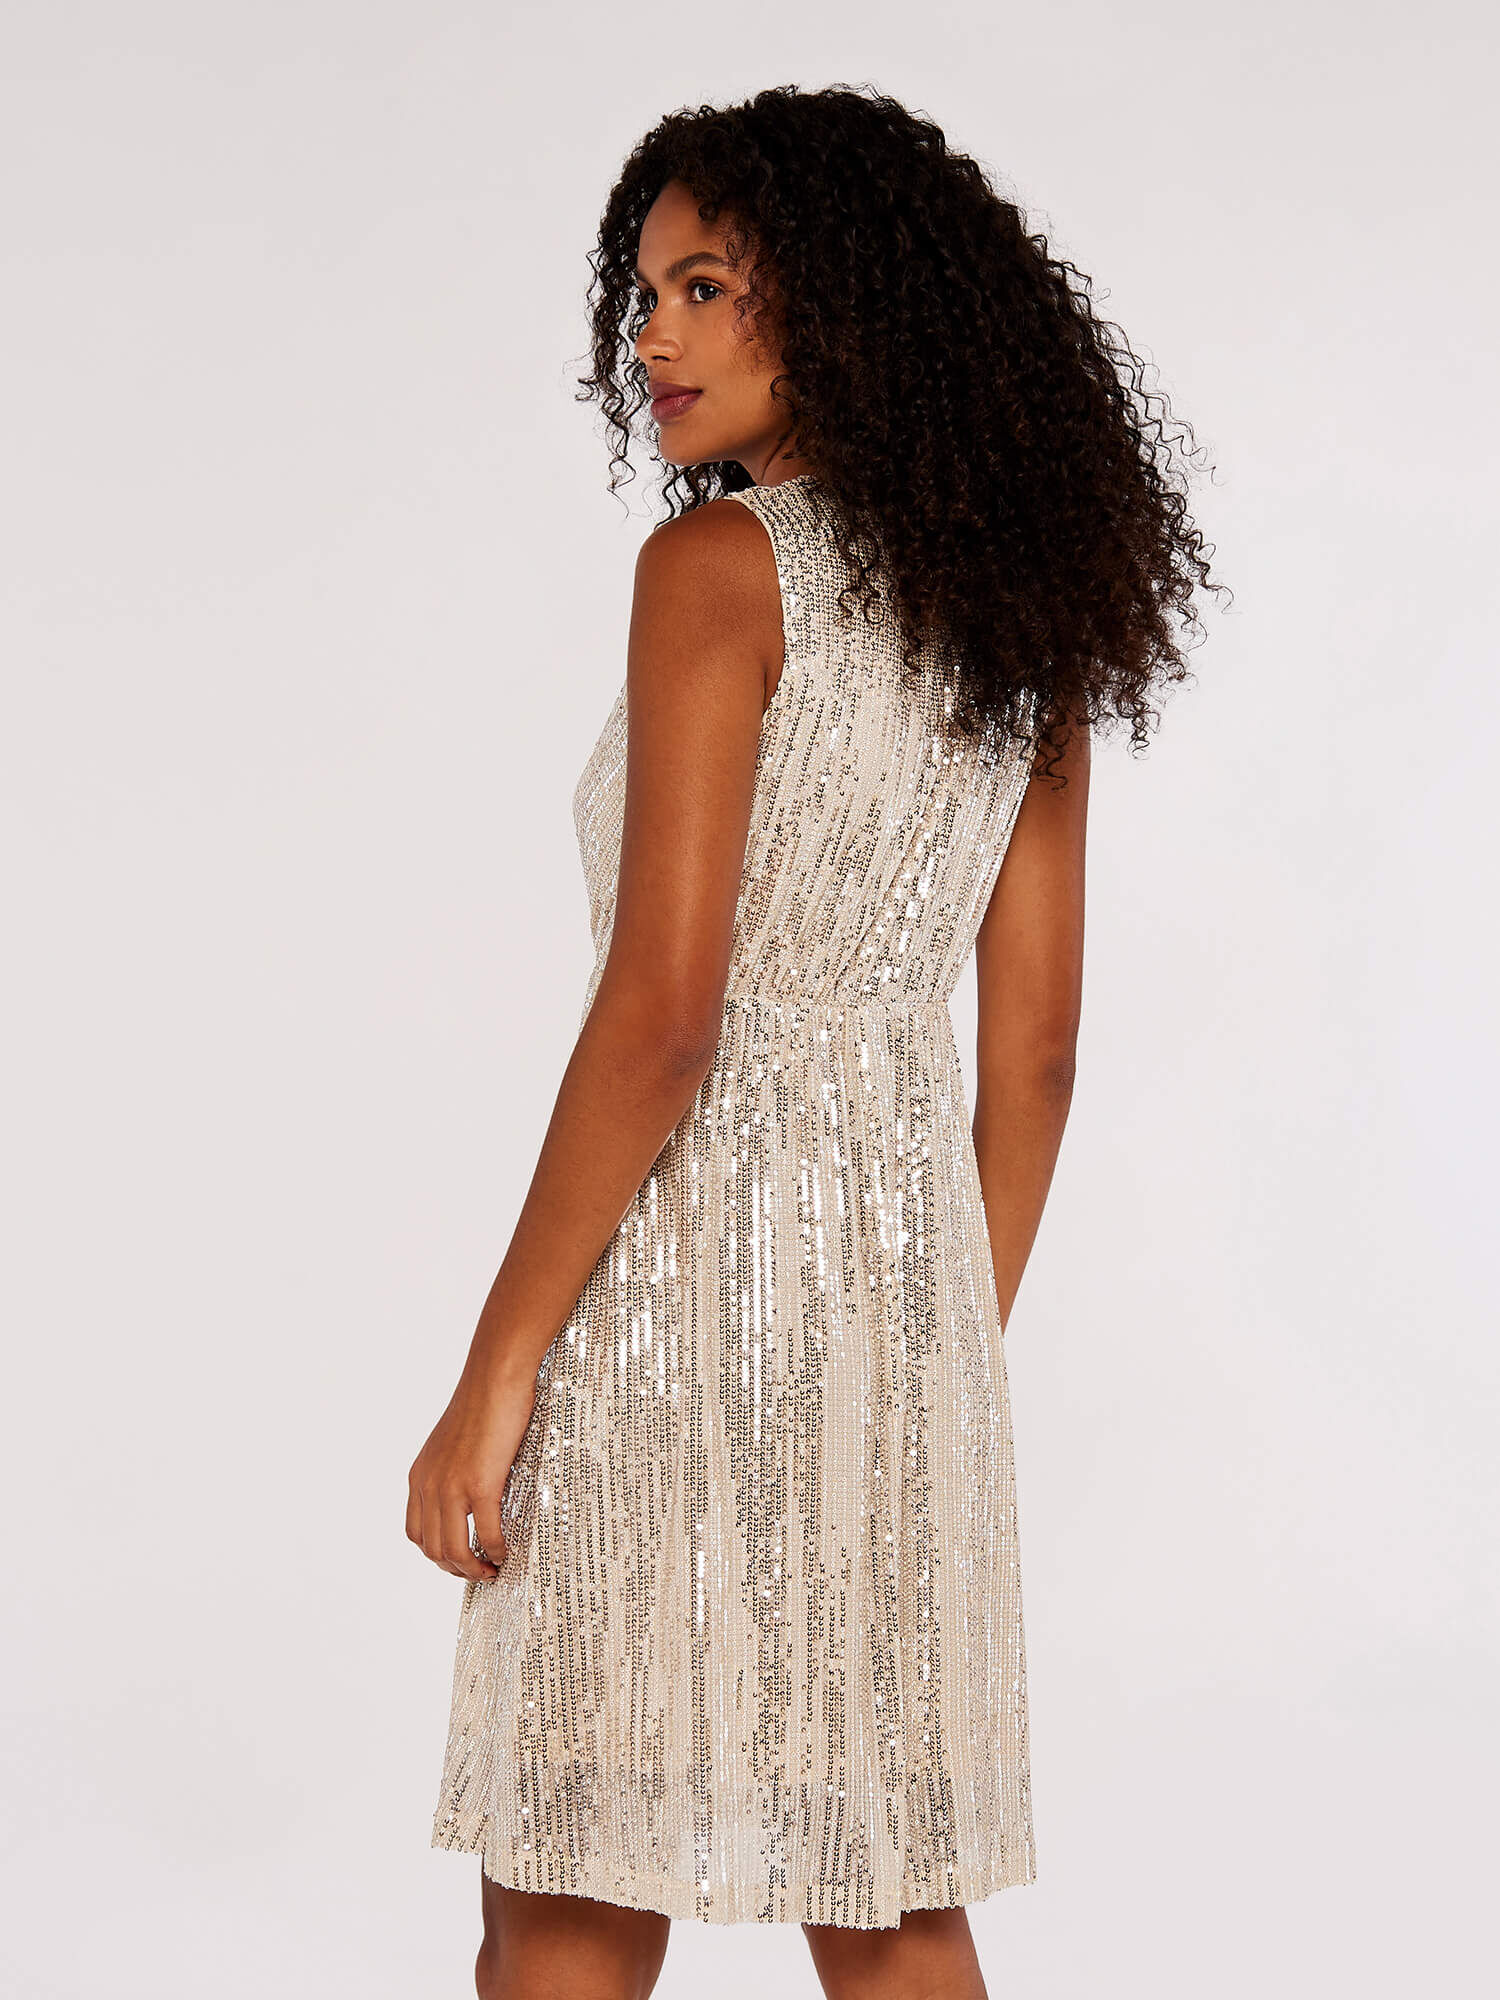 crystal-embellished evening gowns by Falguni Shane Peacock